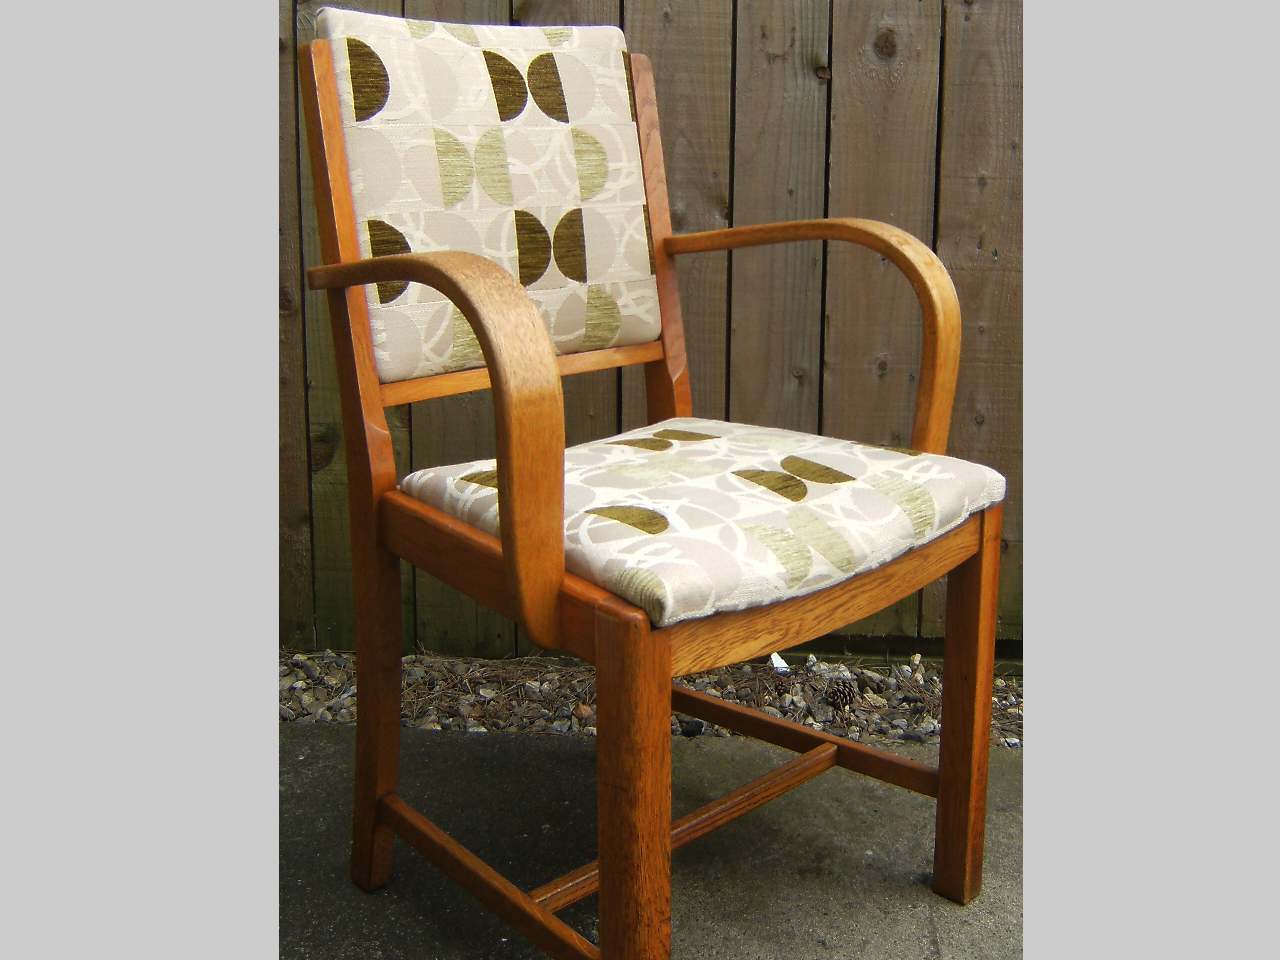 60s ash desk chair finished